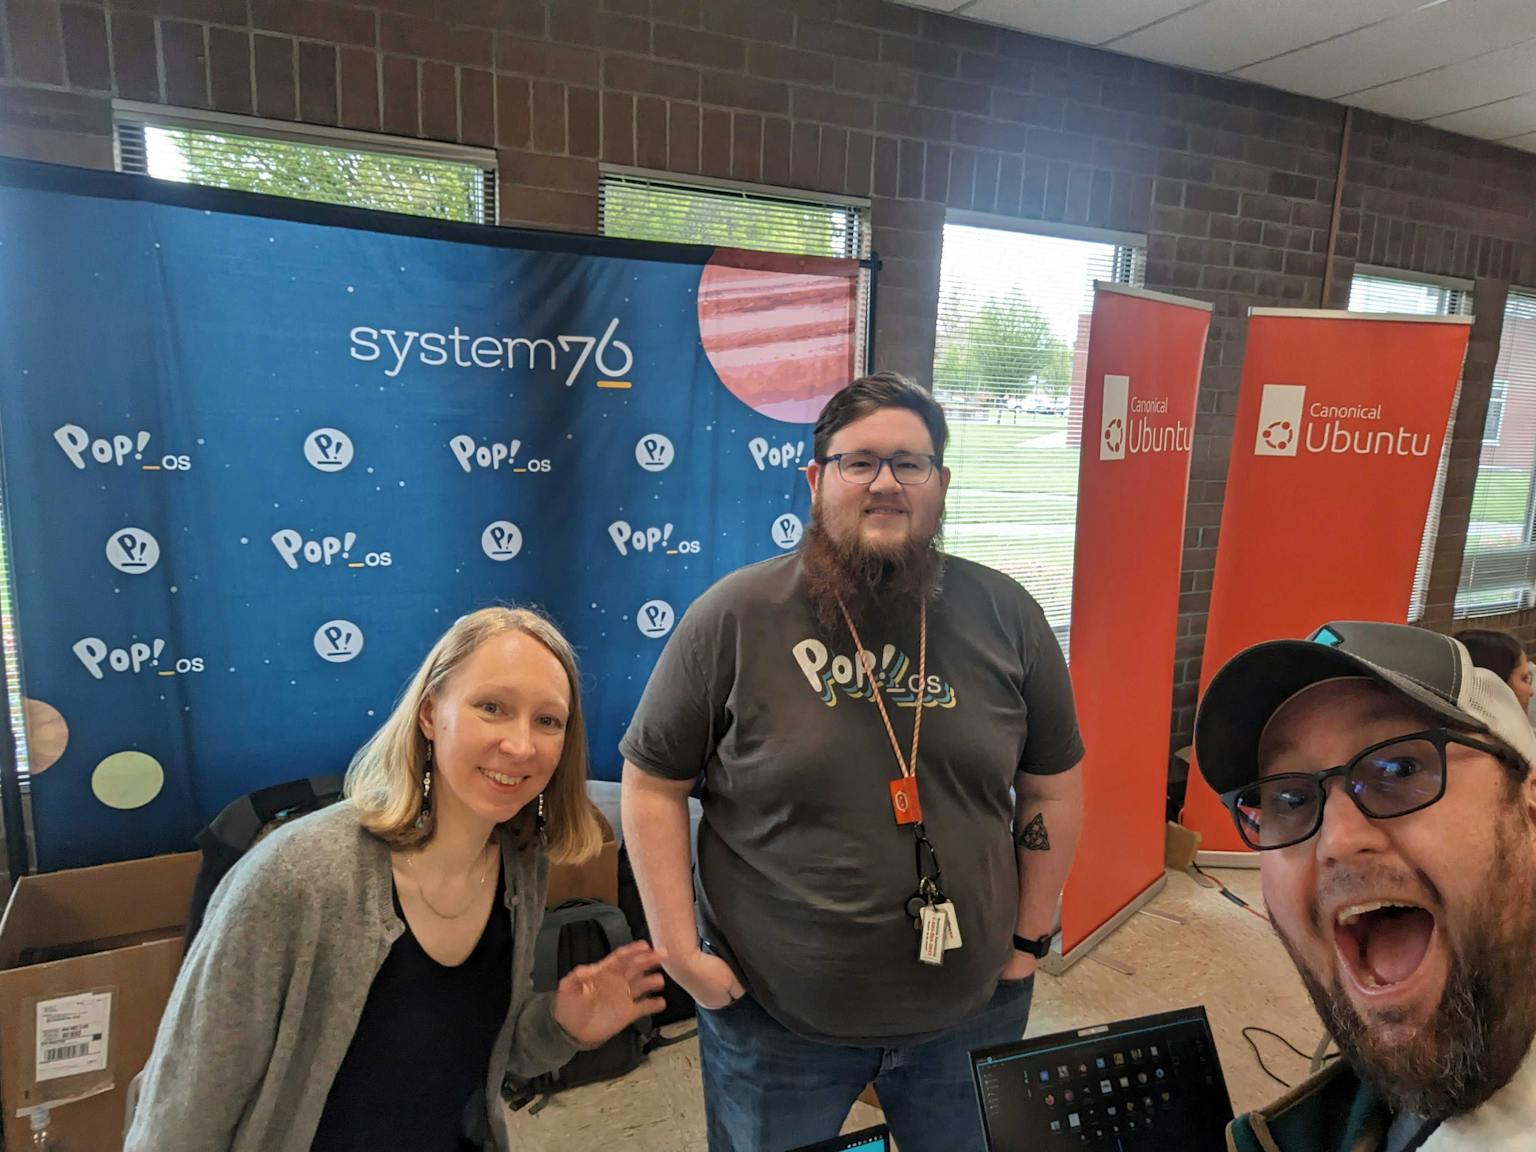 Maria and Aaron and Mike standing in front of the System76 Booth at LinuxFest Northwest